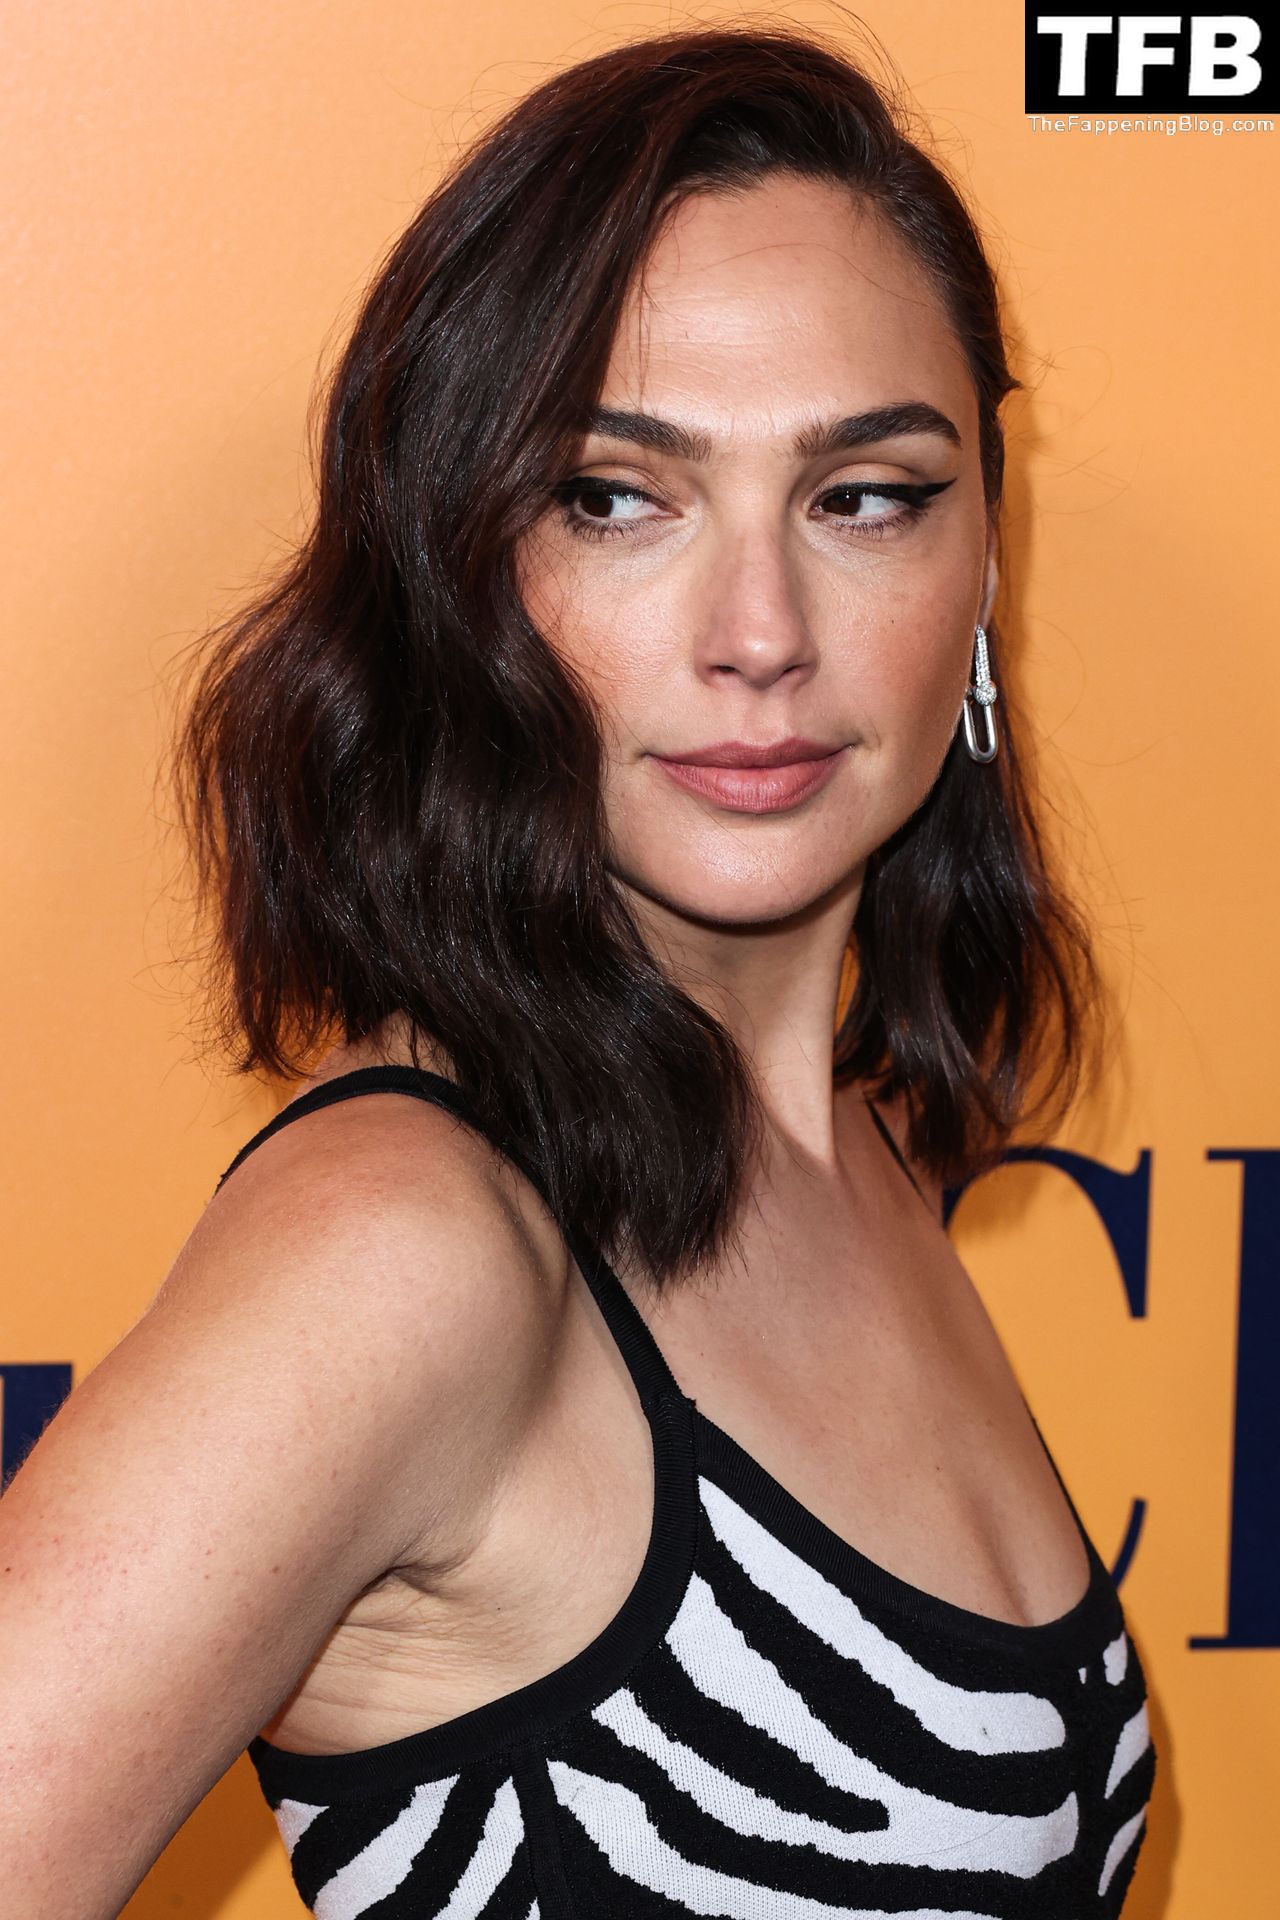 Gal Gadot Sexy 35 thefappeningblog.com  - Gal Gadot Displays Her Gorgeous Figure at the Traveling Exhibition “Solaire Culture” in Beverly Hills (77 Photos)